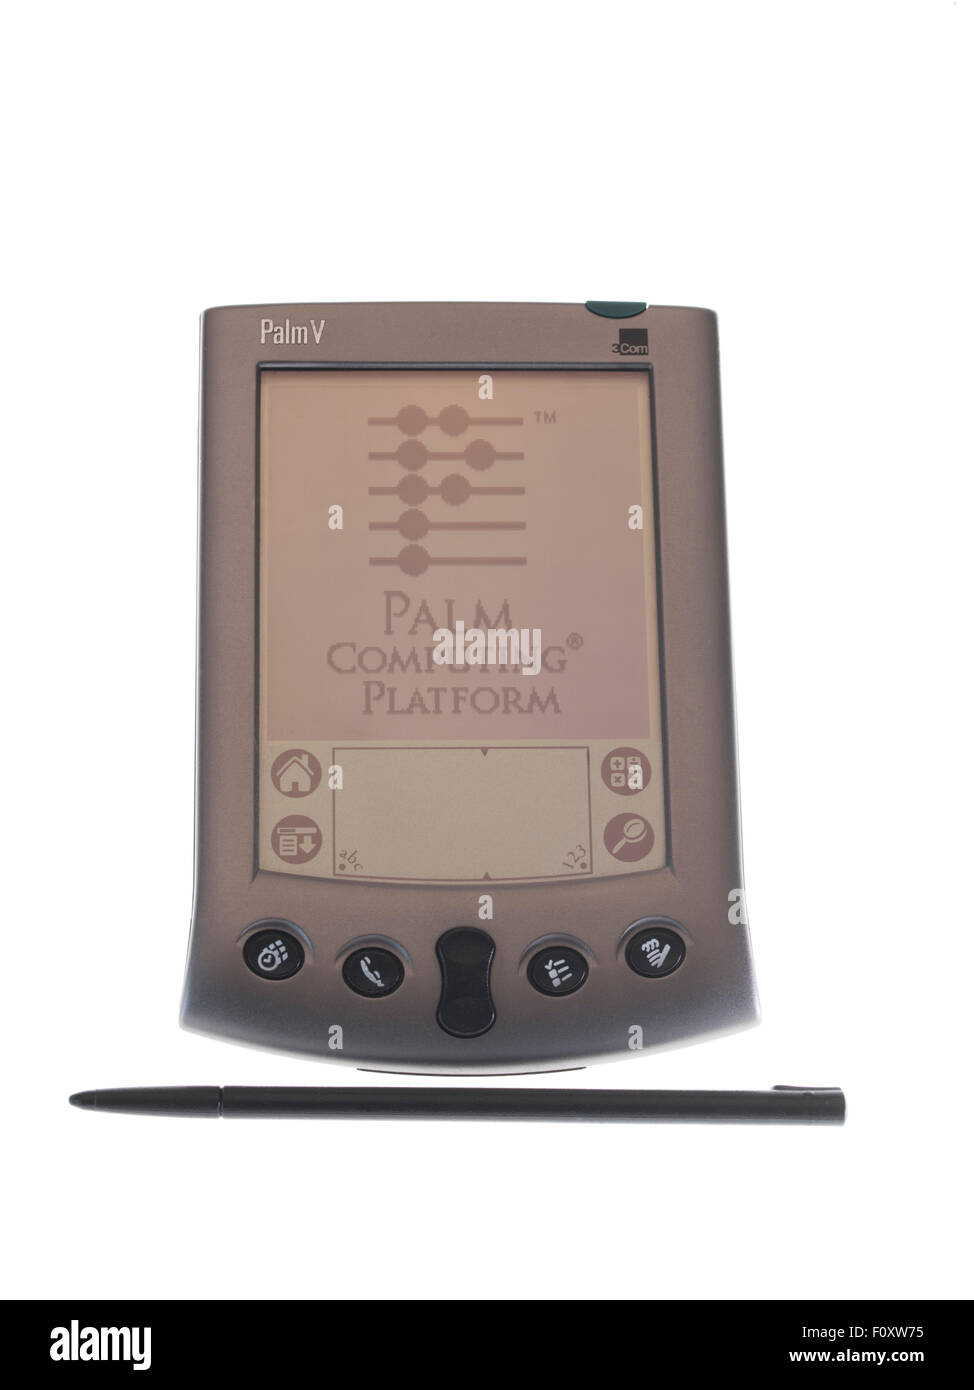 Palm V PDA personal digital assistant by Palm Computing of 3Com released Feb 1999 Stock Photo